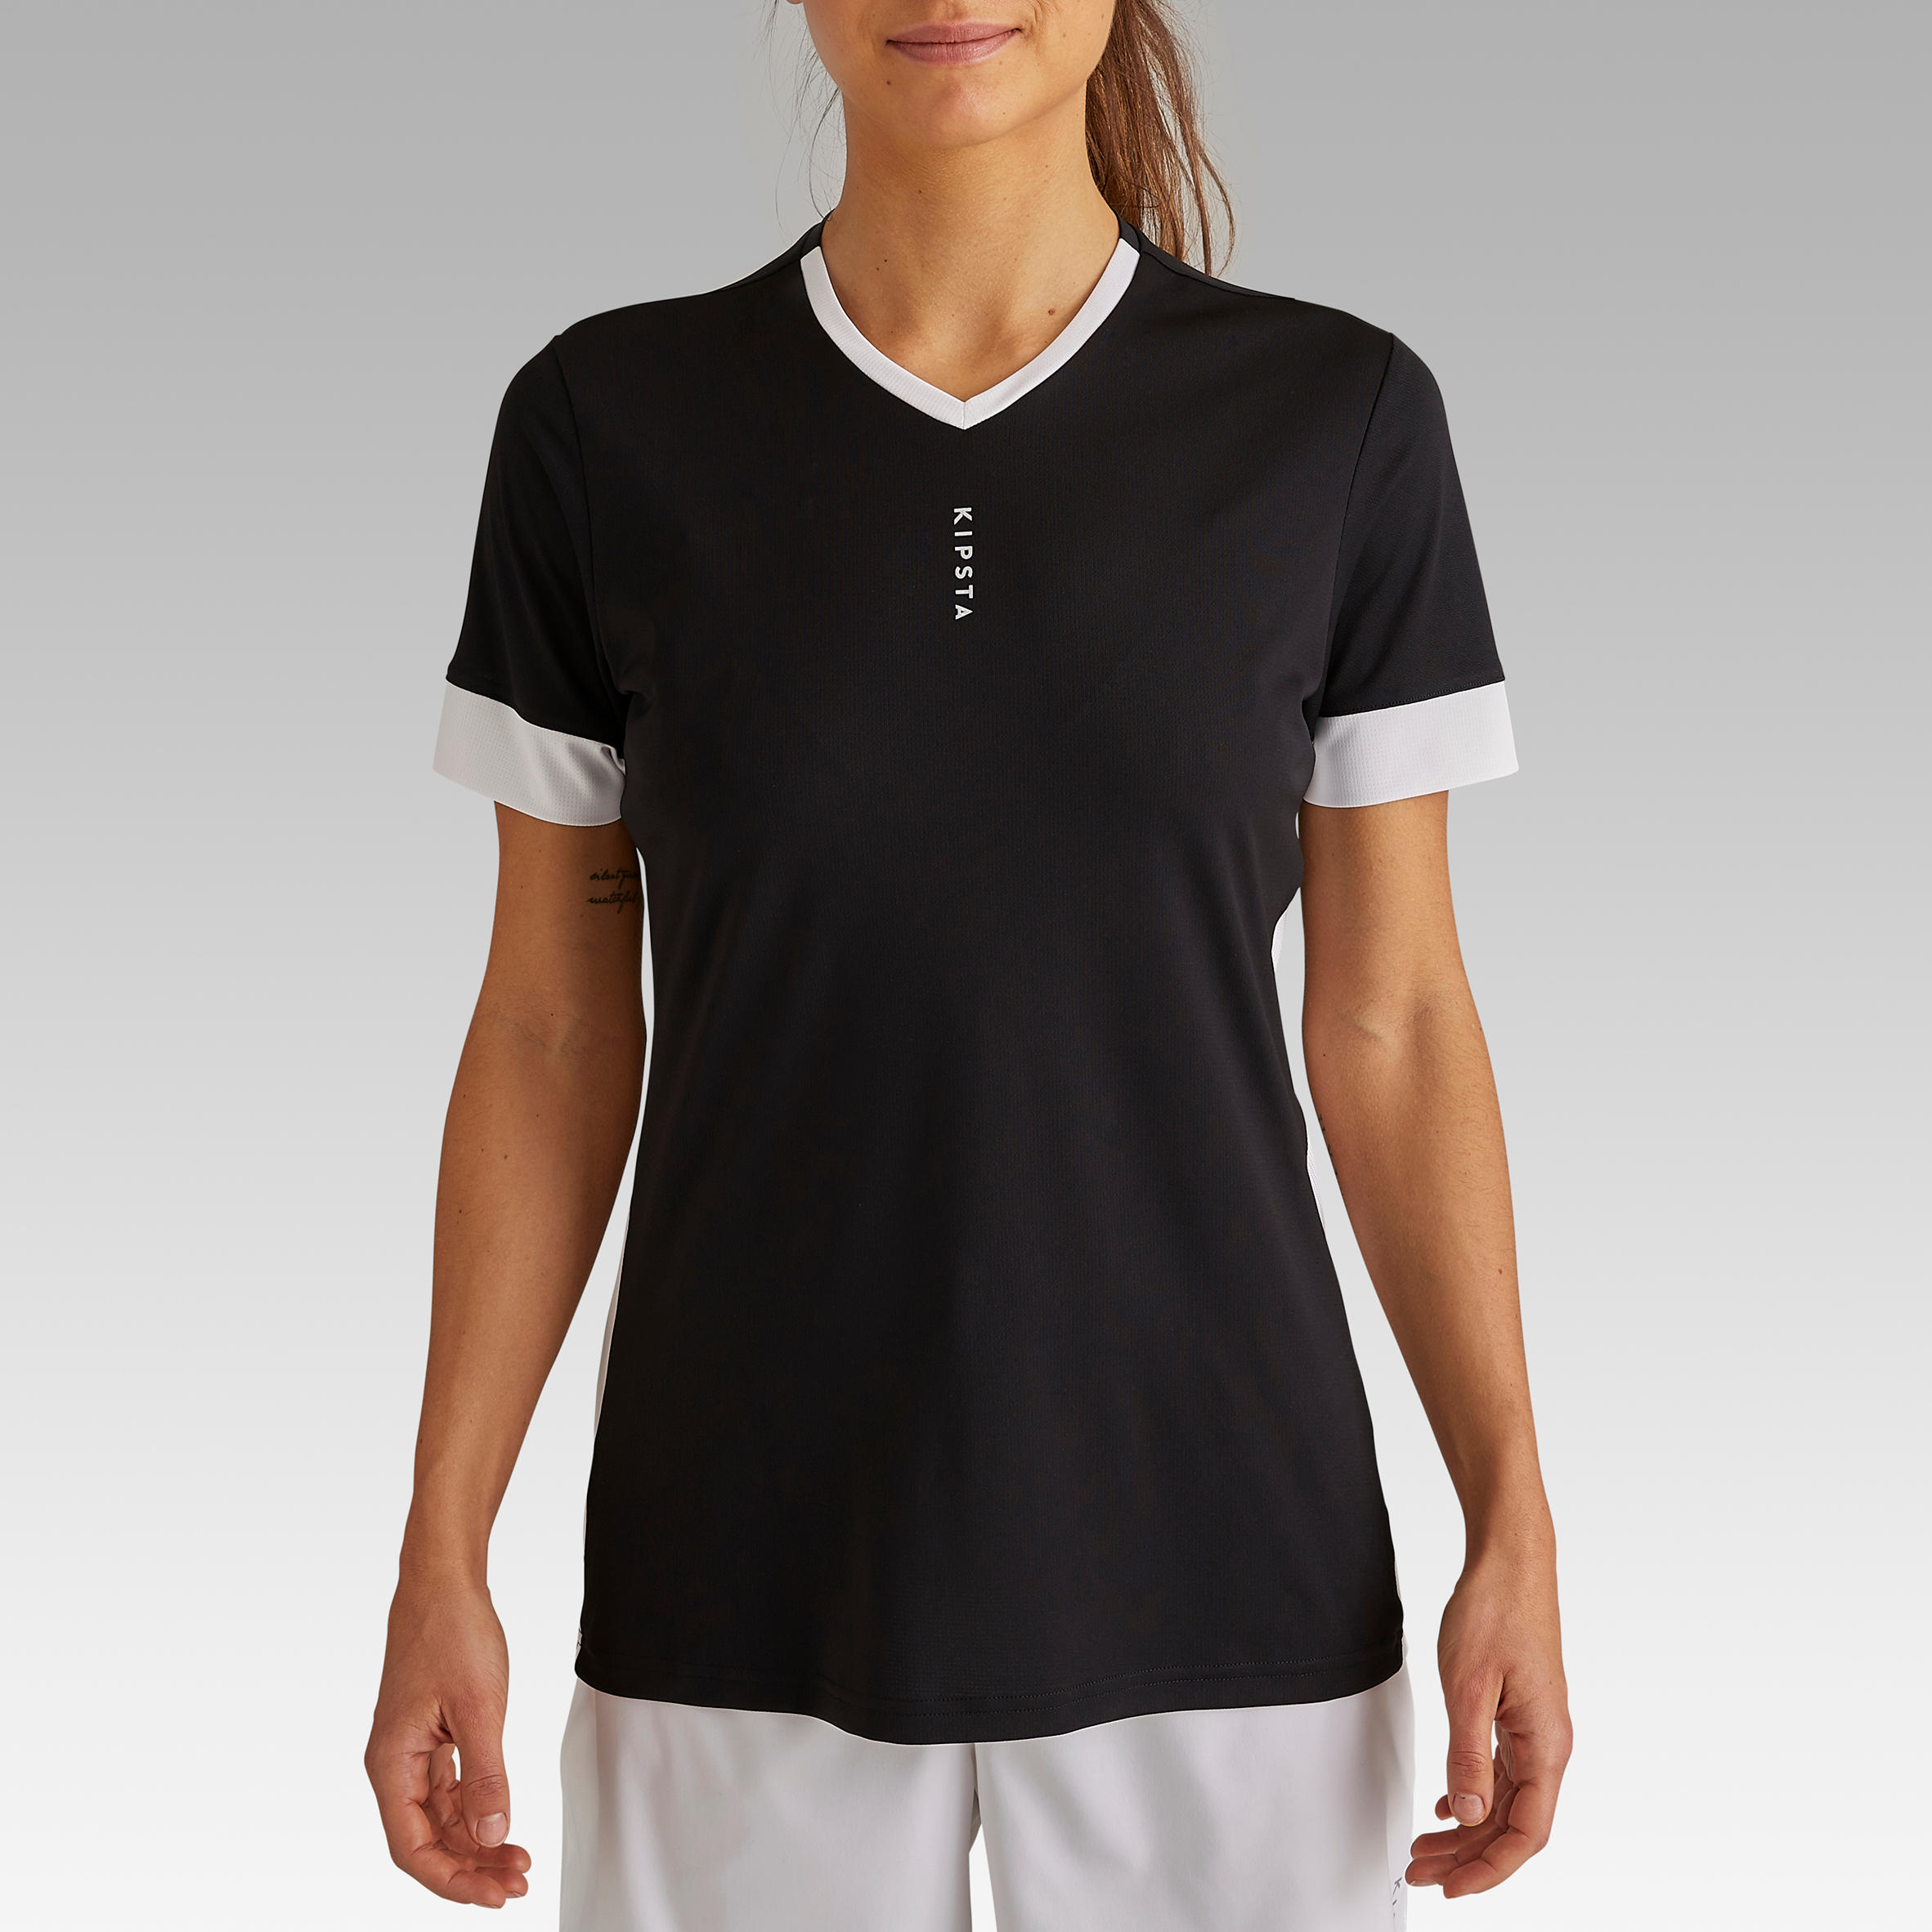 black and white jersey women's